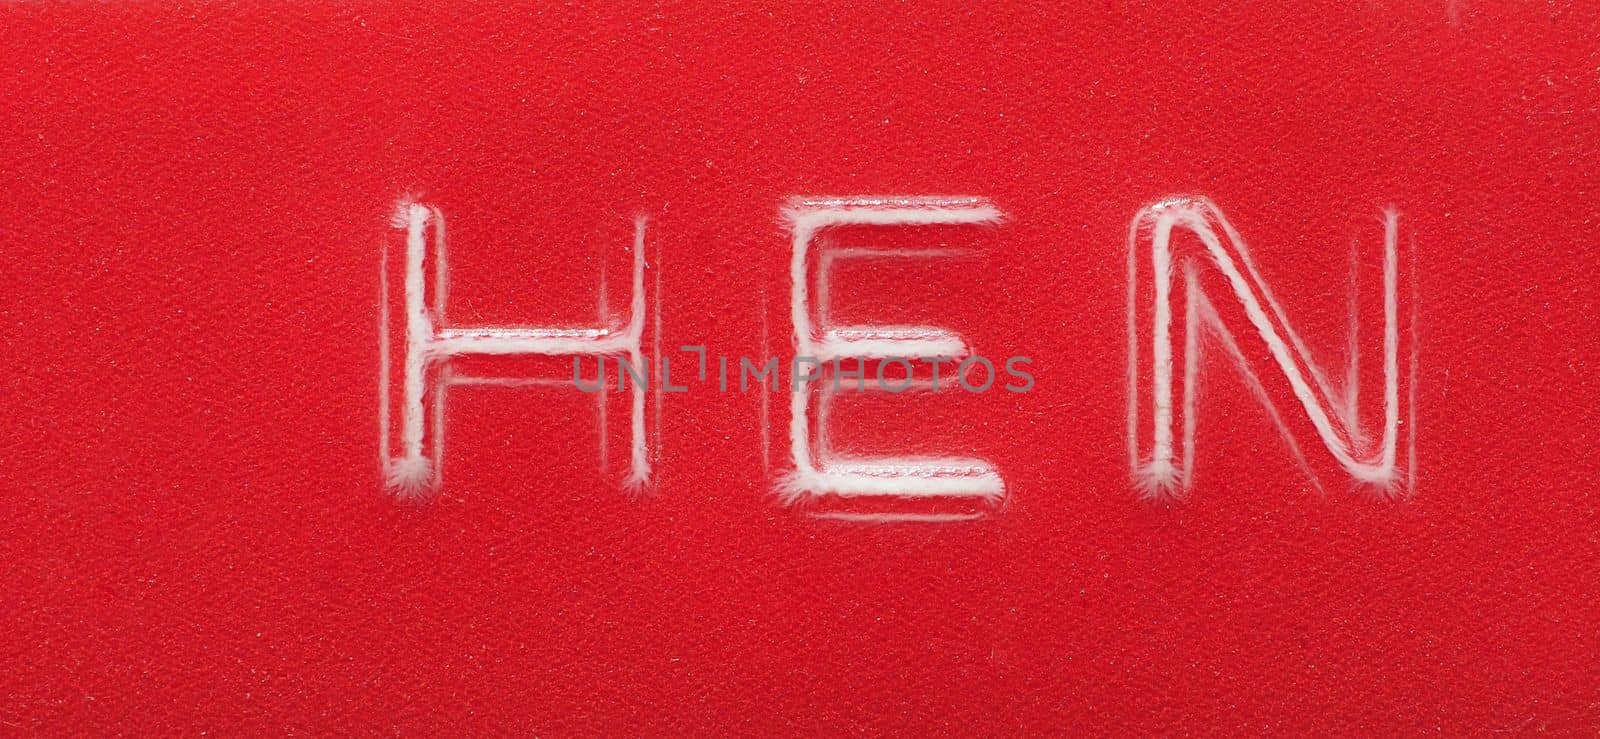 HEN label written with red plastic embossing tape